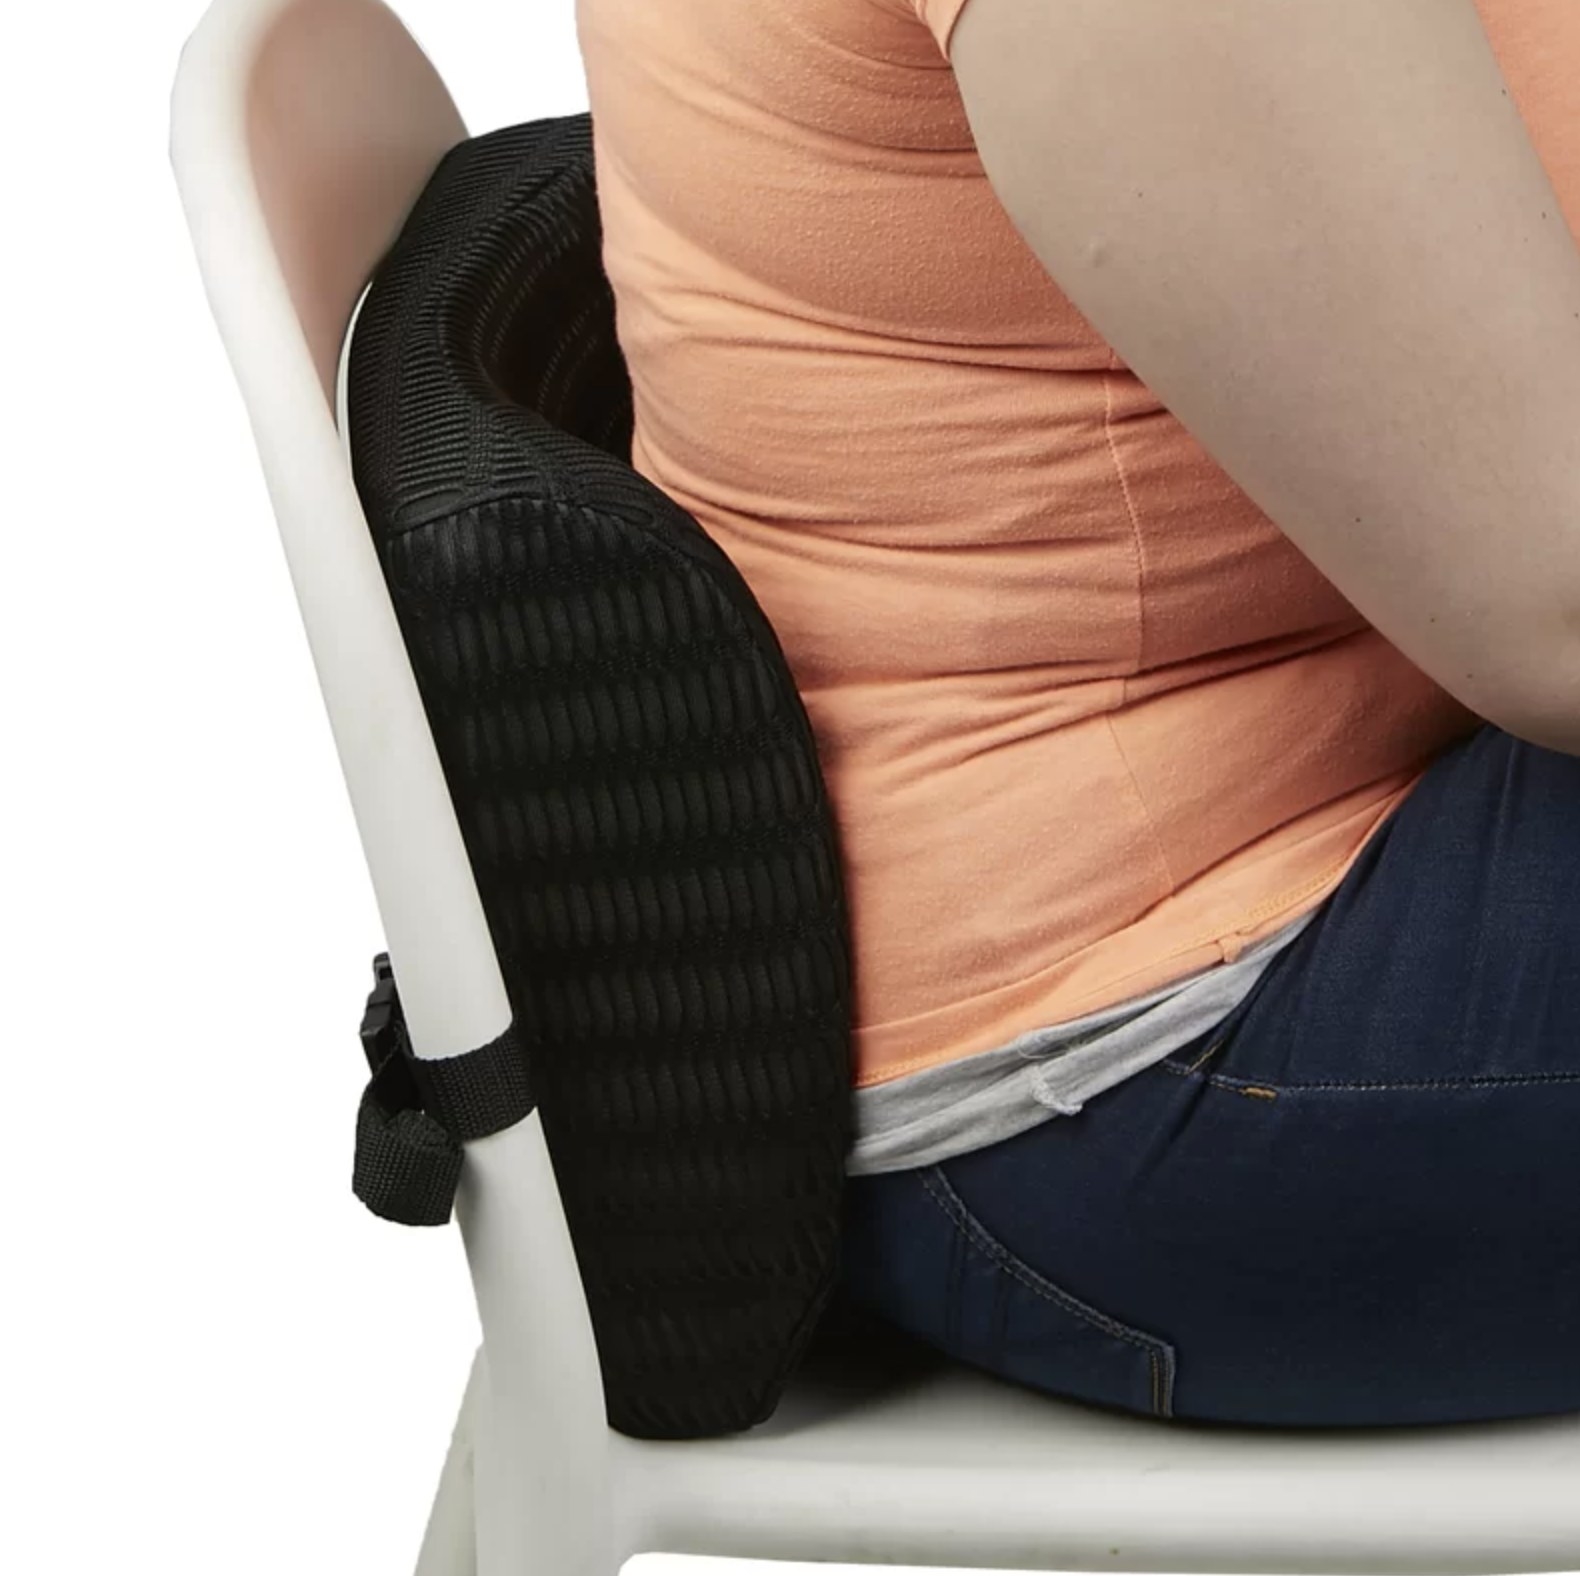 Person is sitting on a chair with a lumbar cushion attached to the back